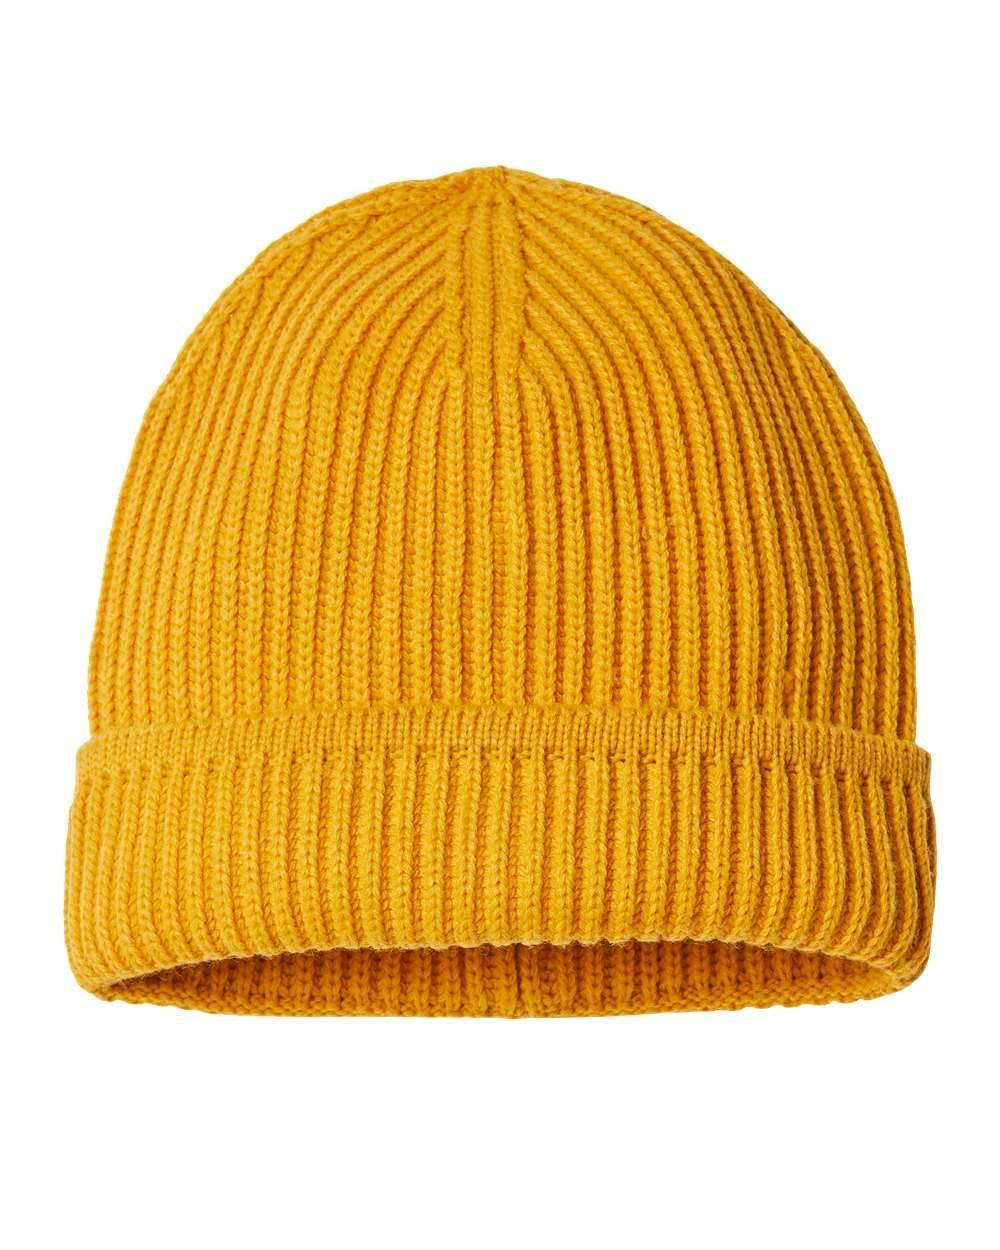 Image for Sustainable Finish Edge Cuffed Beanie - MAPLE